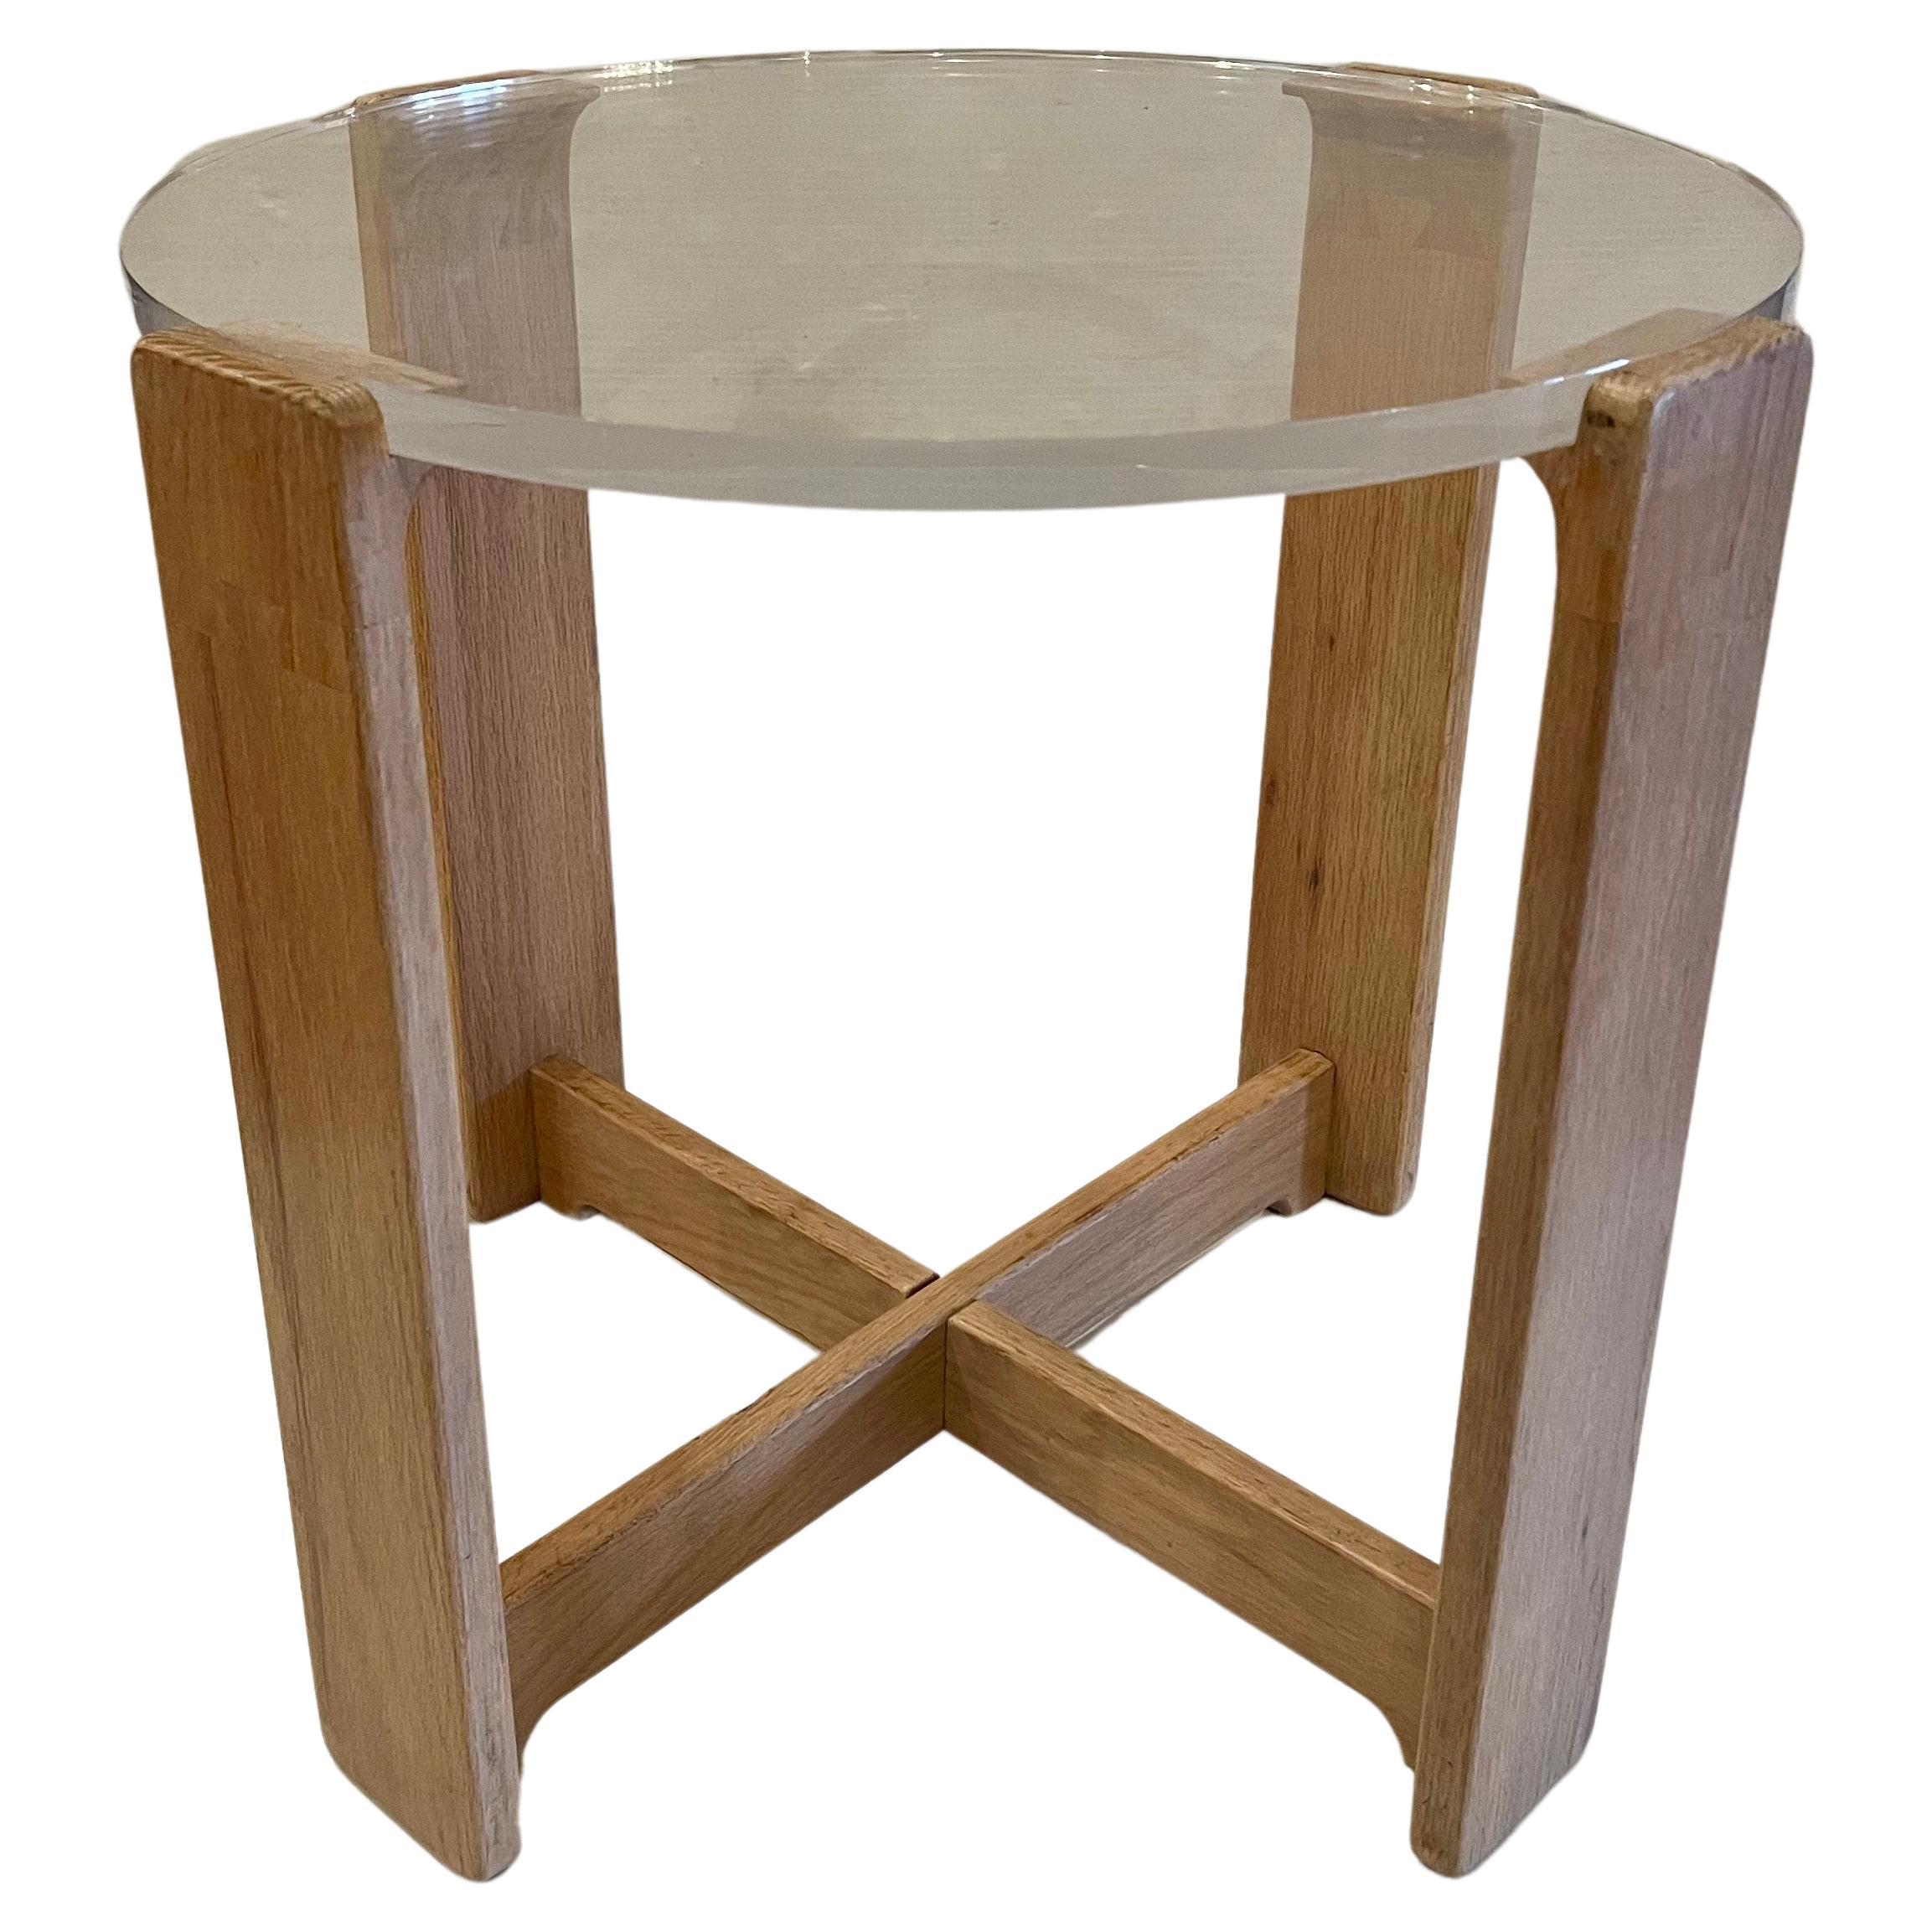 Post-Modern Postmodern Solid Whitewashed Oak Criss/Cross Cocktail Table Lucite Round Top For Sale